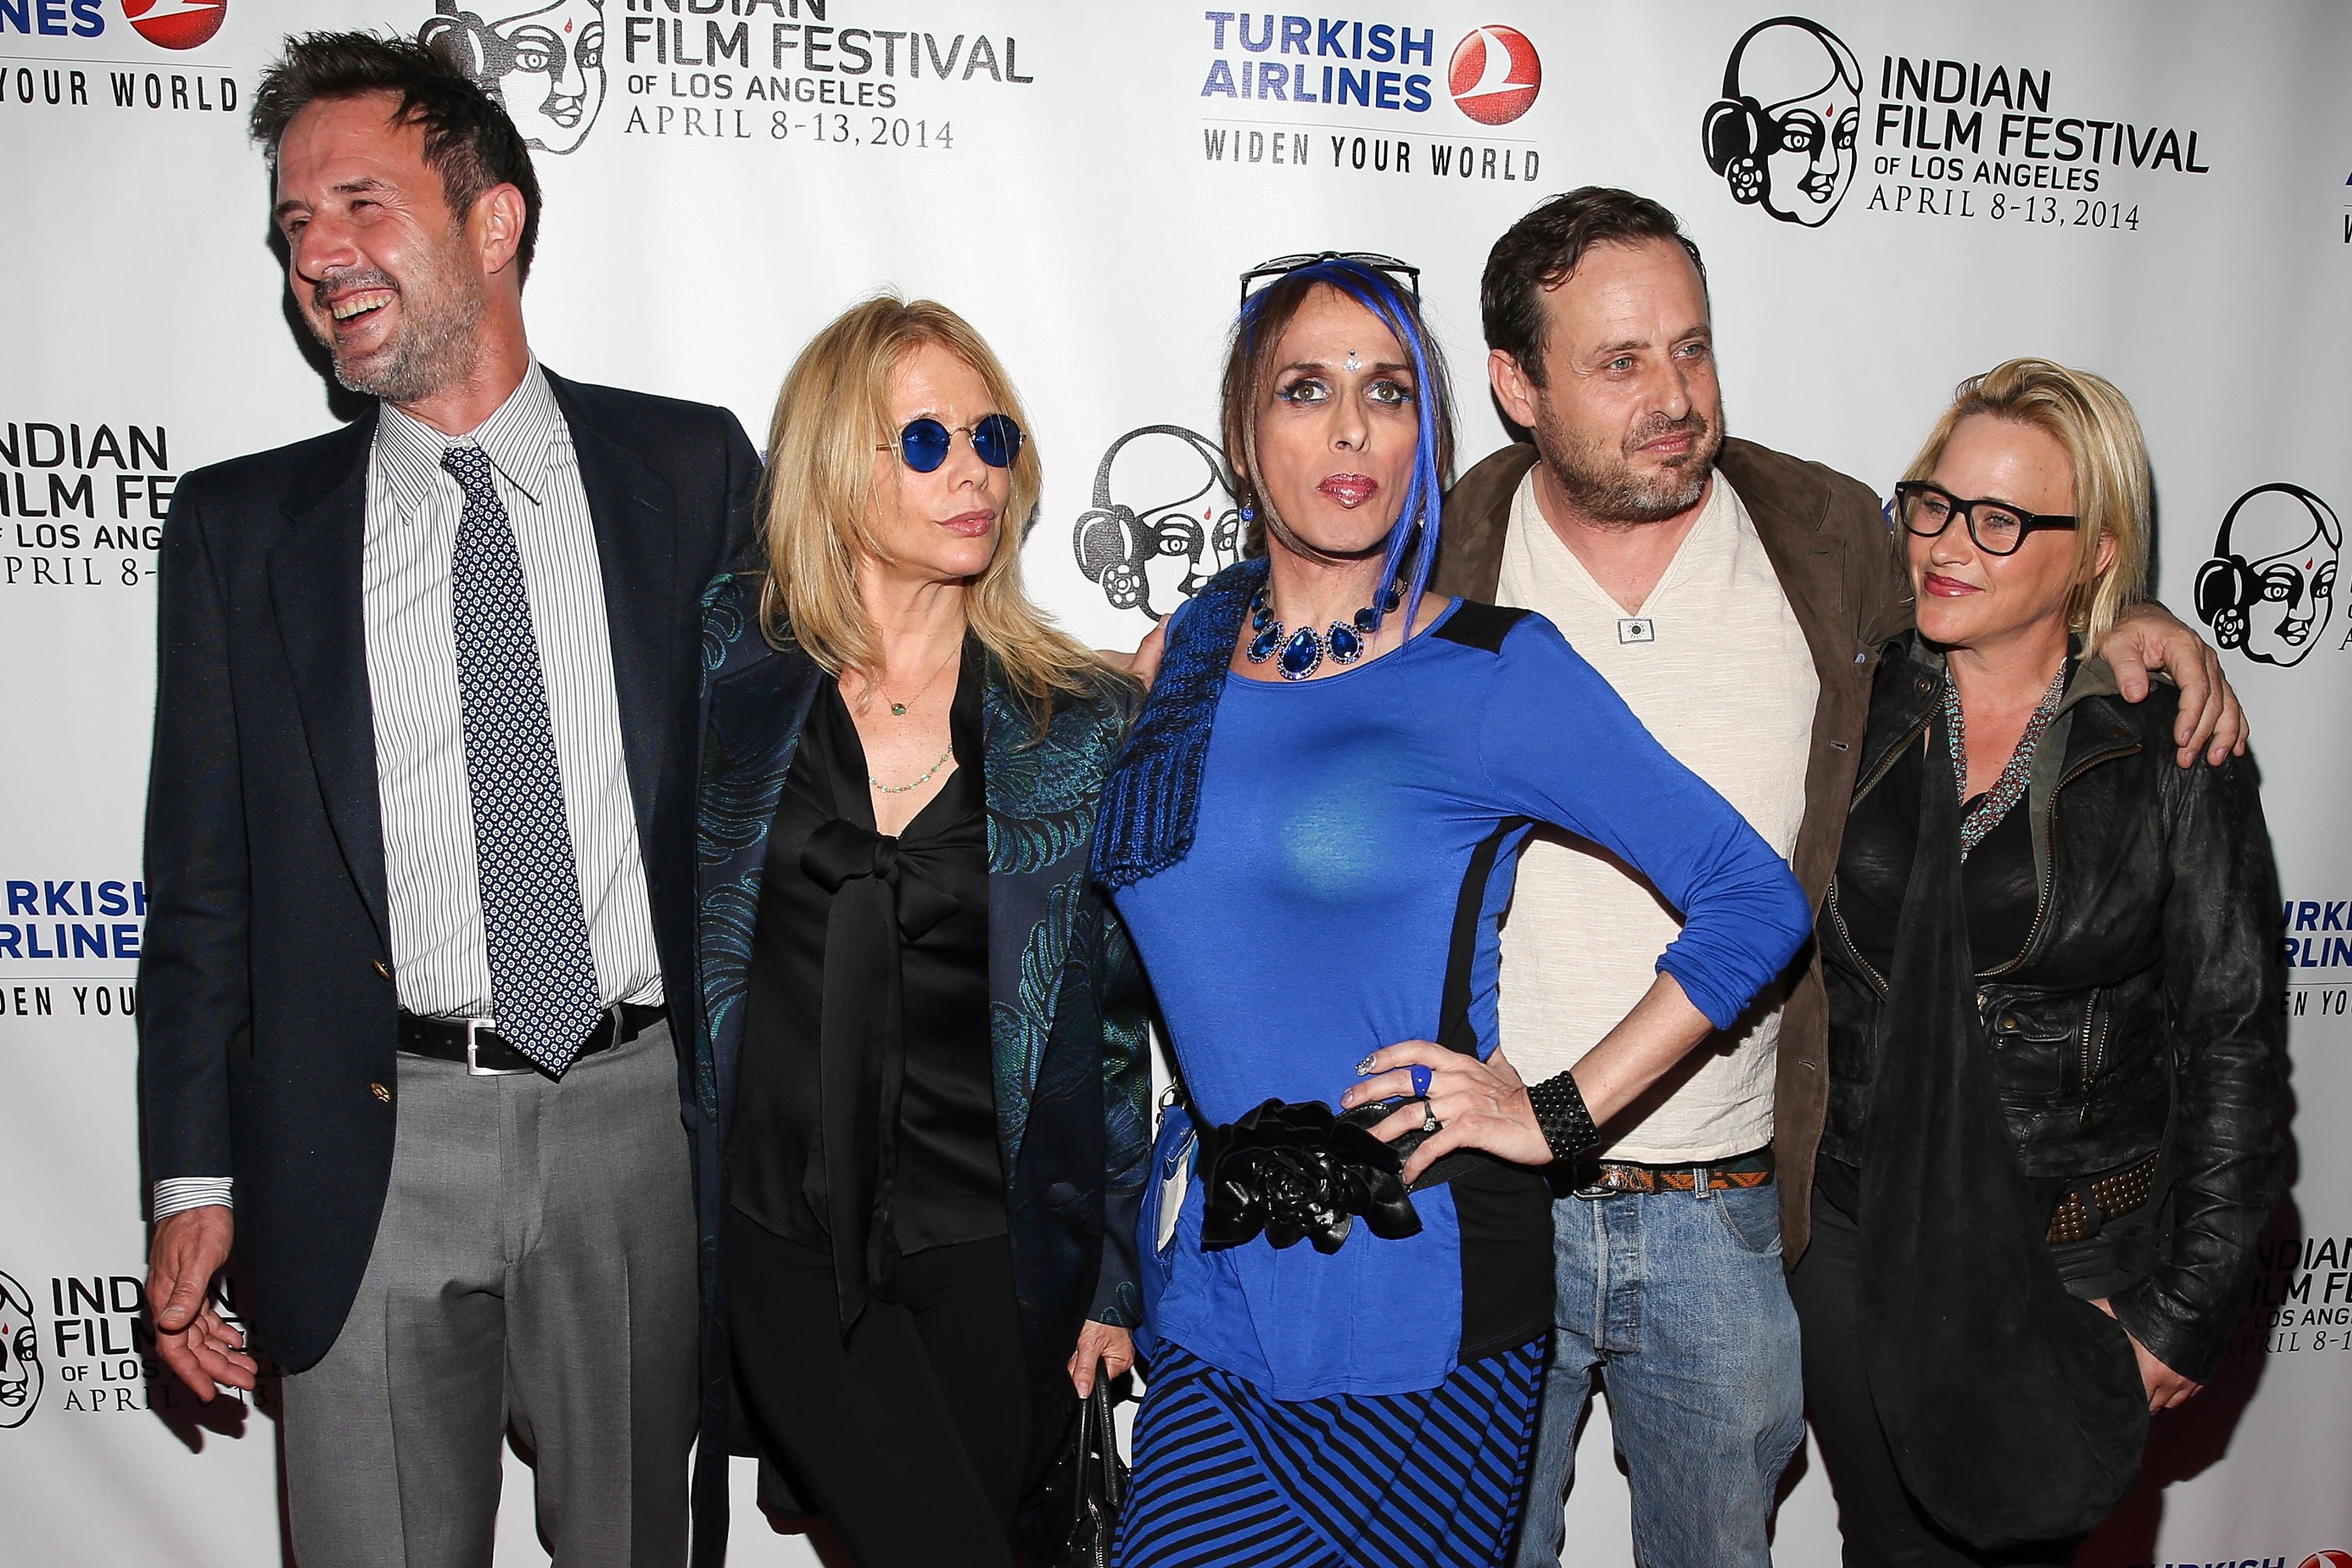 David Arquette, Rosanna Arquette, Alexis Arquette, Richmond Arquette, and Patricia Arquette attend the Indian Film Festival Of Los Angeles Opening Night Gala for 'Sold' at ArcLight Cinemas on April 8, 2014 in Hollywood